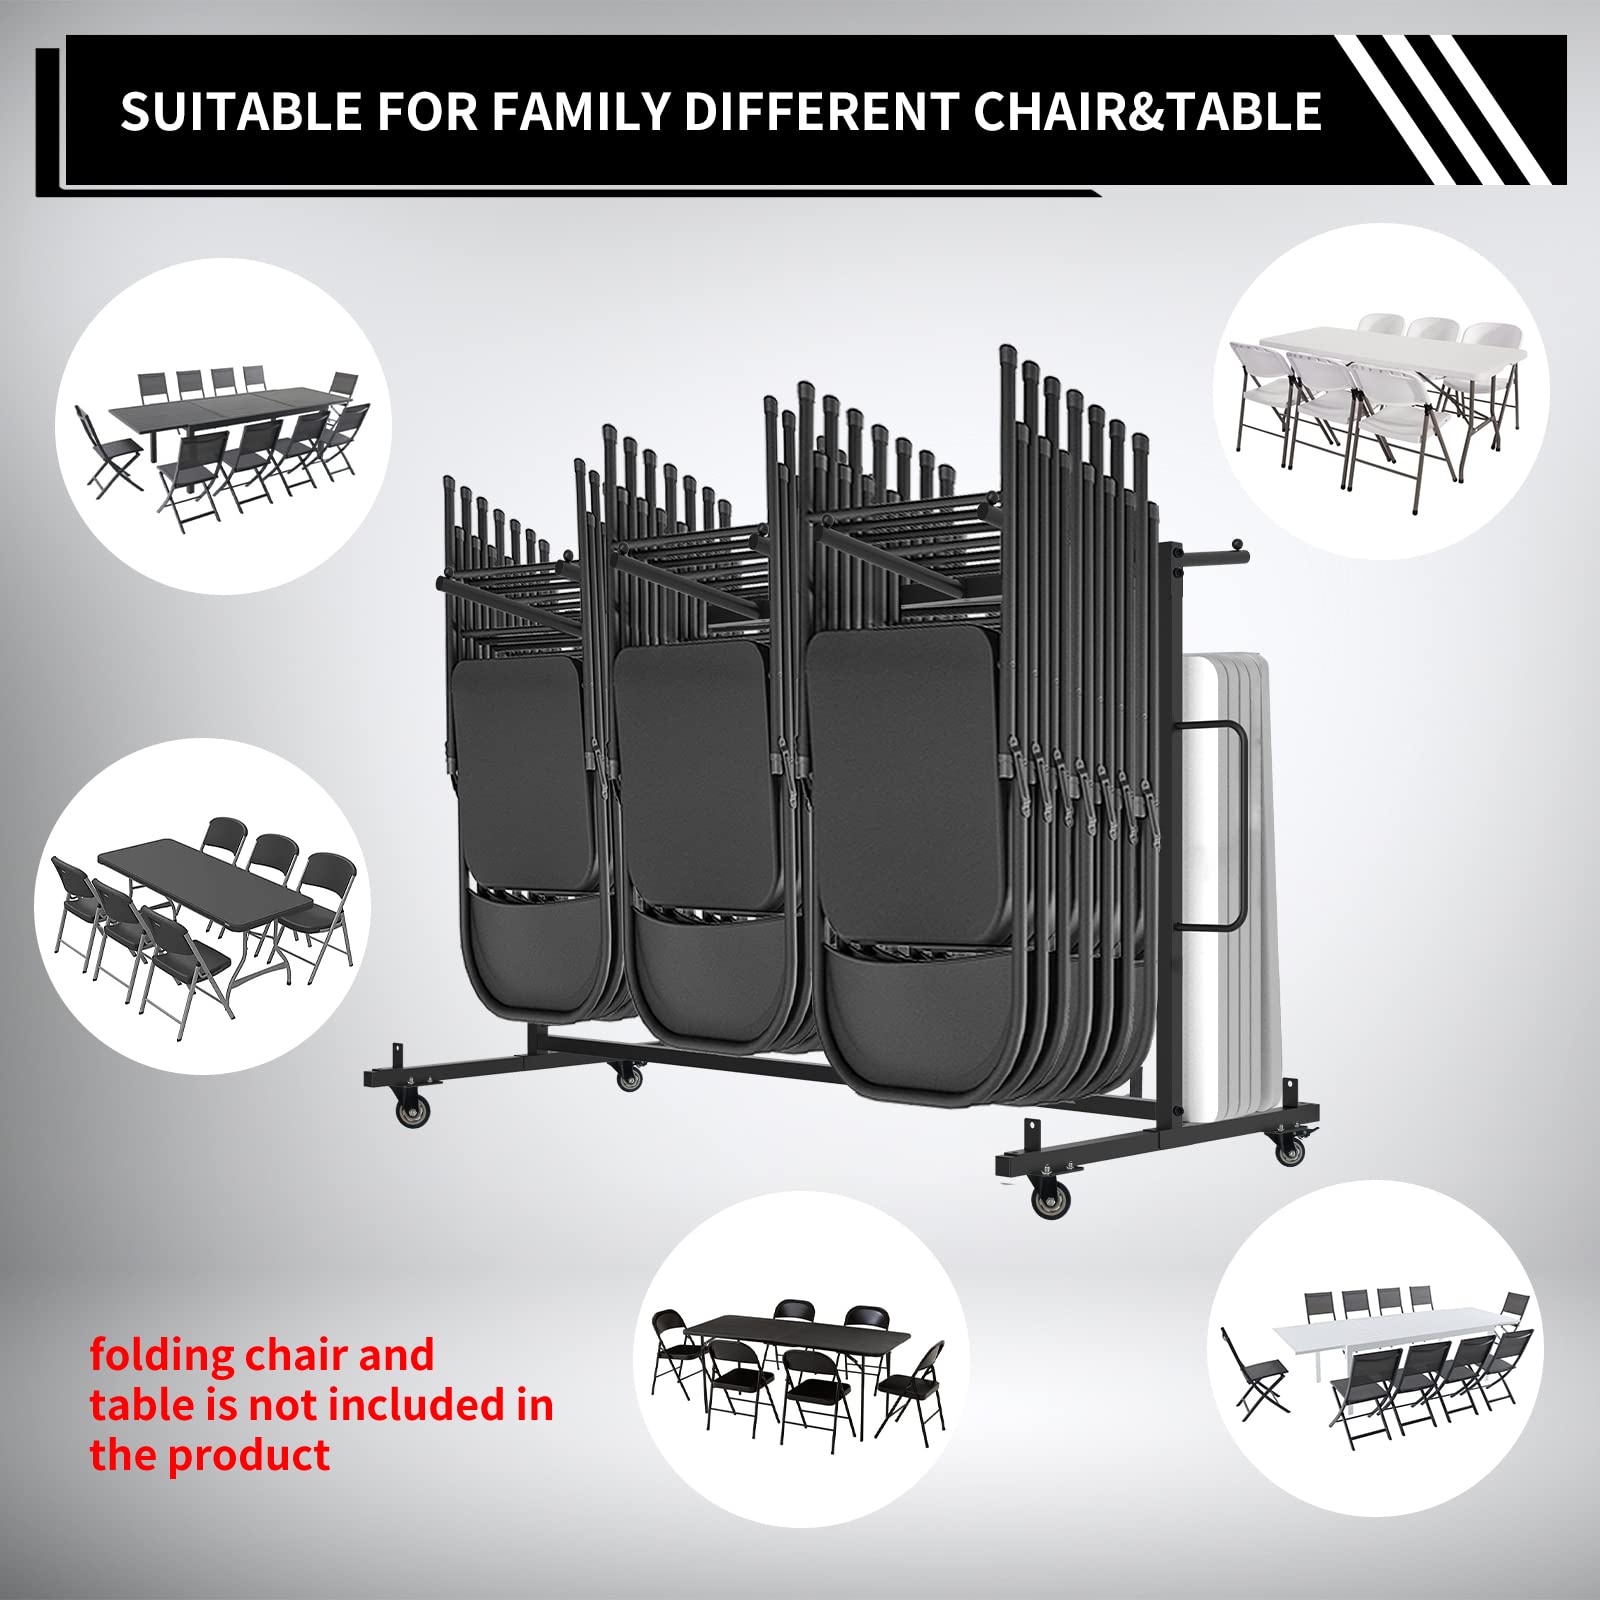 Folding Table and Chair Cart, Folding Chair and Table Storage Rack with 400LBS Capacity for 42 Folding Chairs Heavy Metal Folding Chair Dolly Holder Rack with Rubber Locking Wheels,Straps and Cover